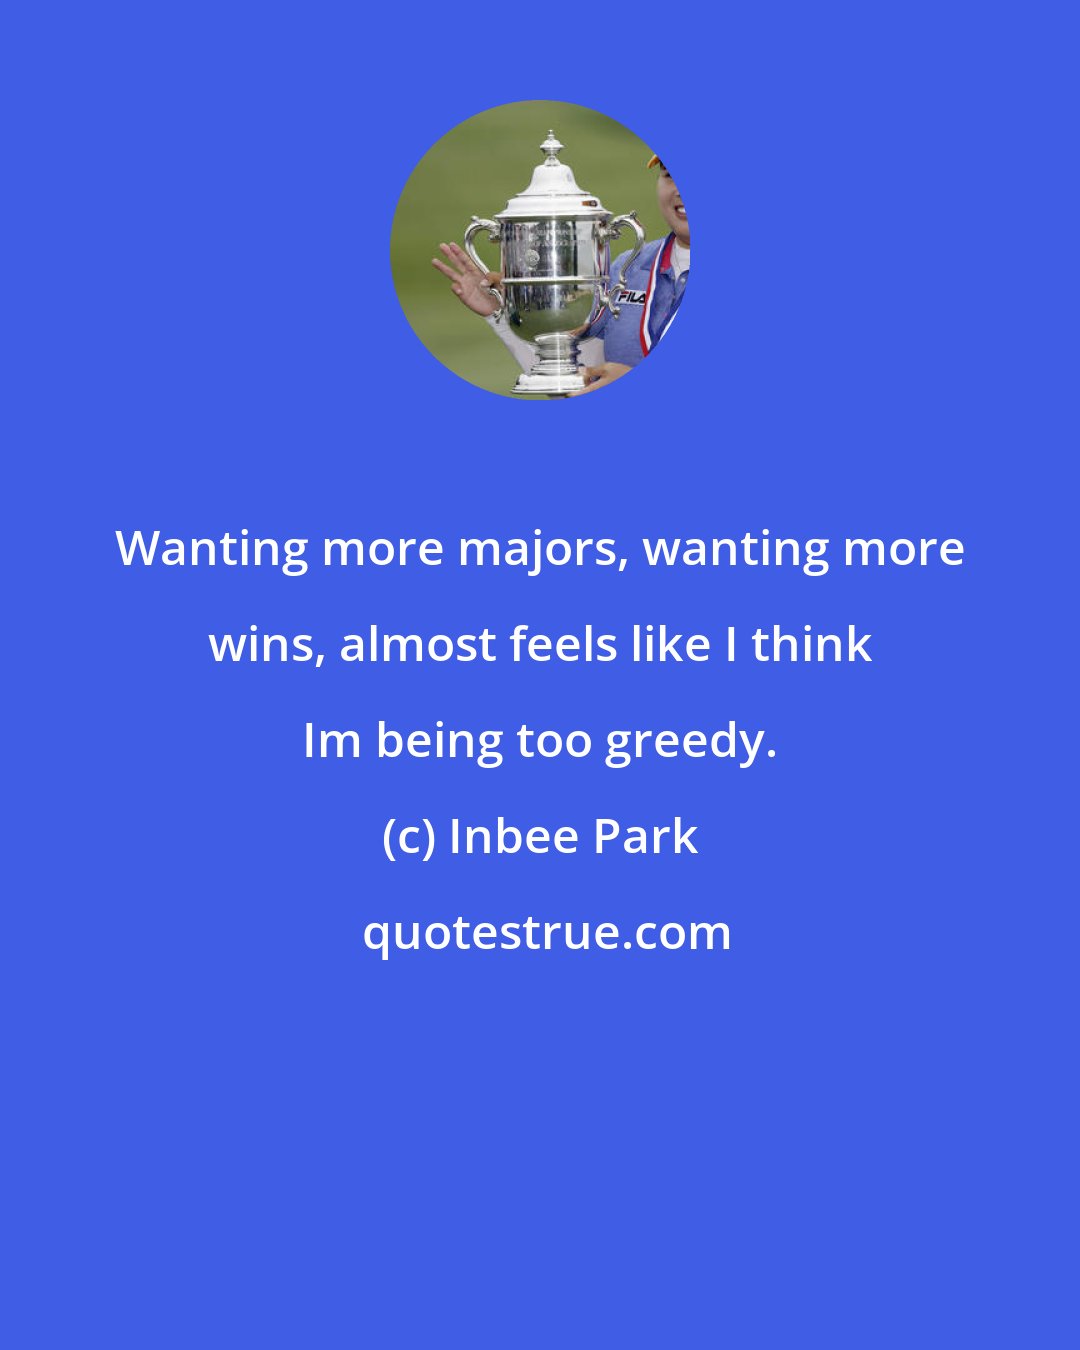 Inbee Park: Wanting more majors, wanting more wins, almost feels like I think Im being too greedy.